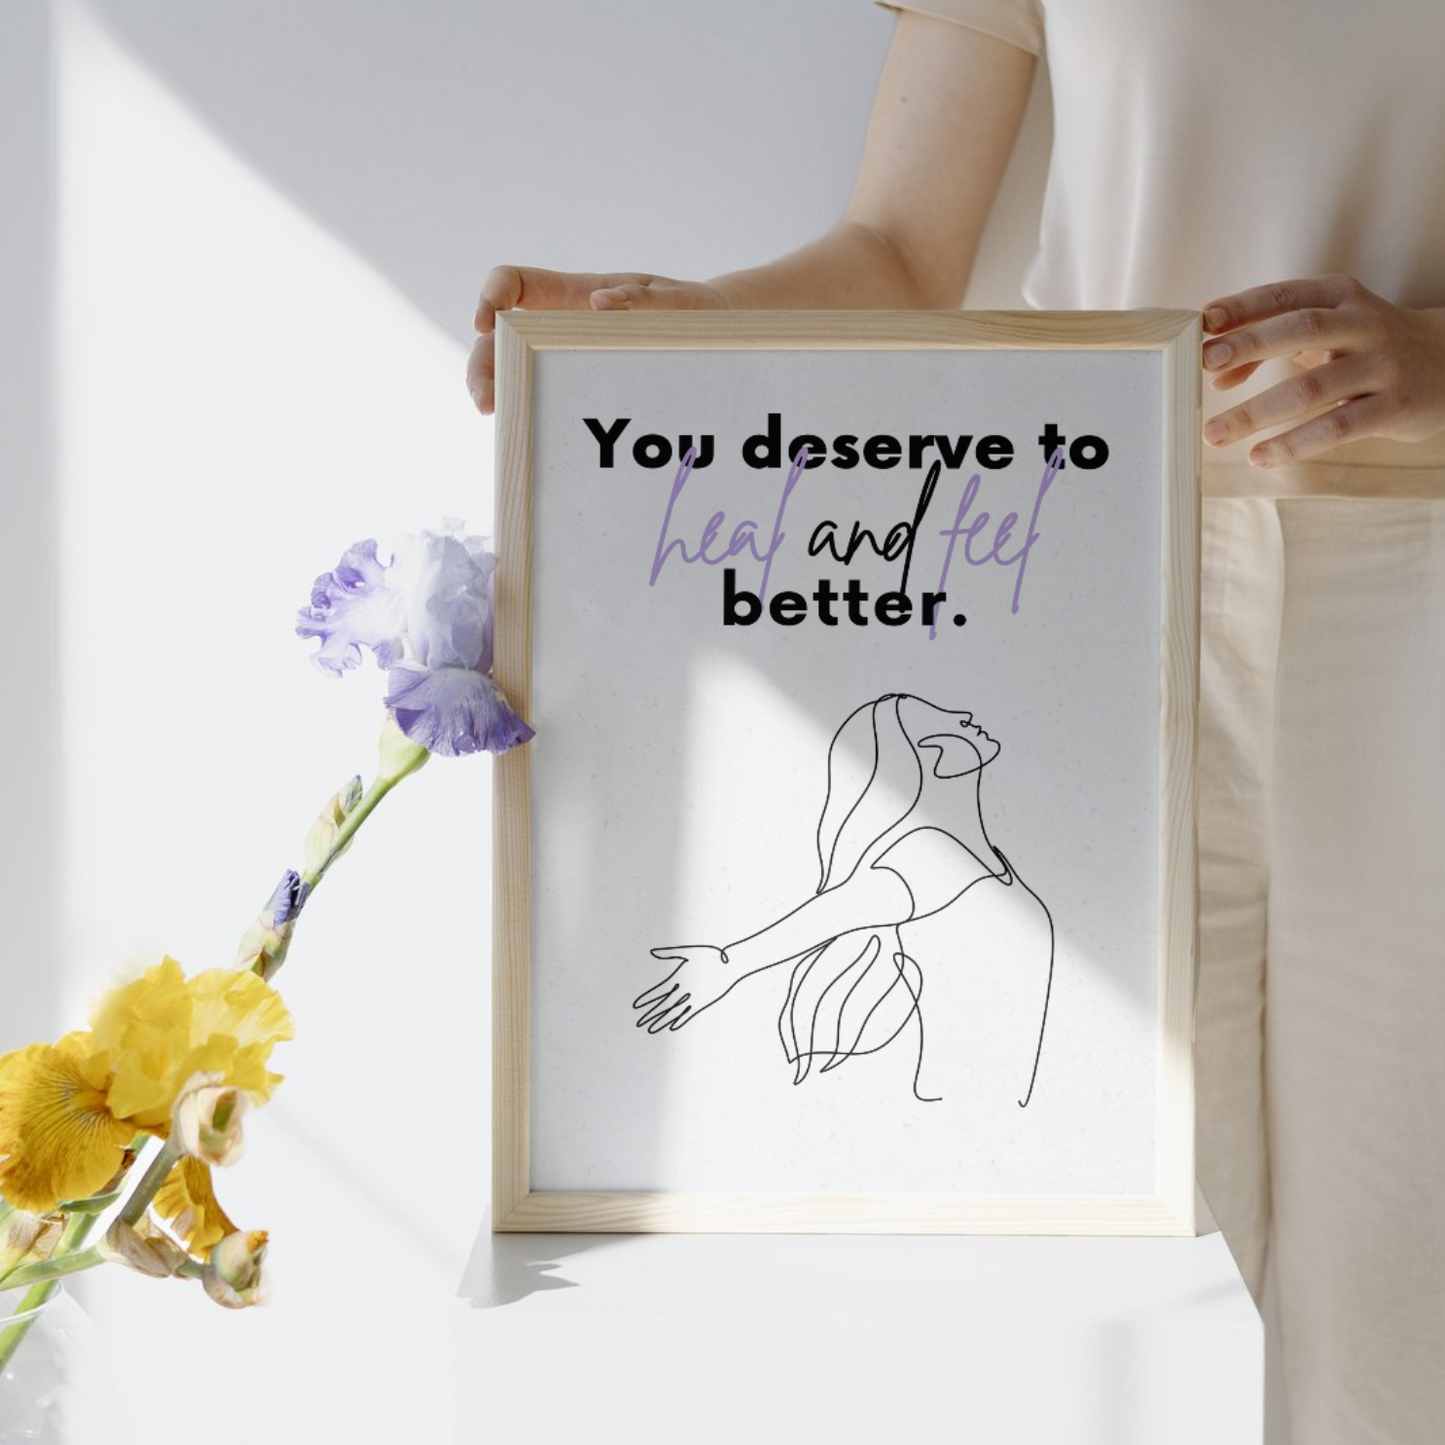 You deserve to heal and feel better Poster Sign